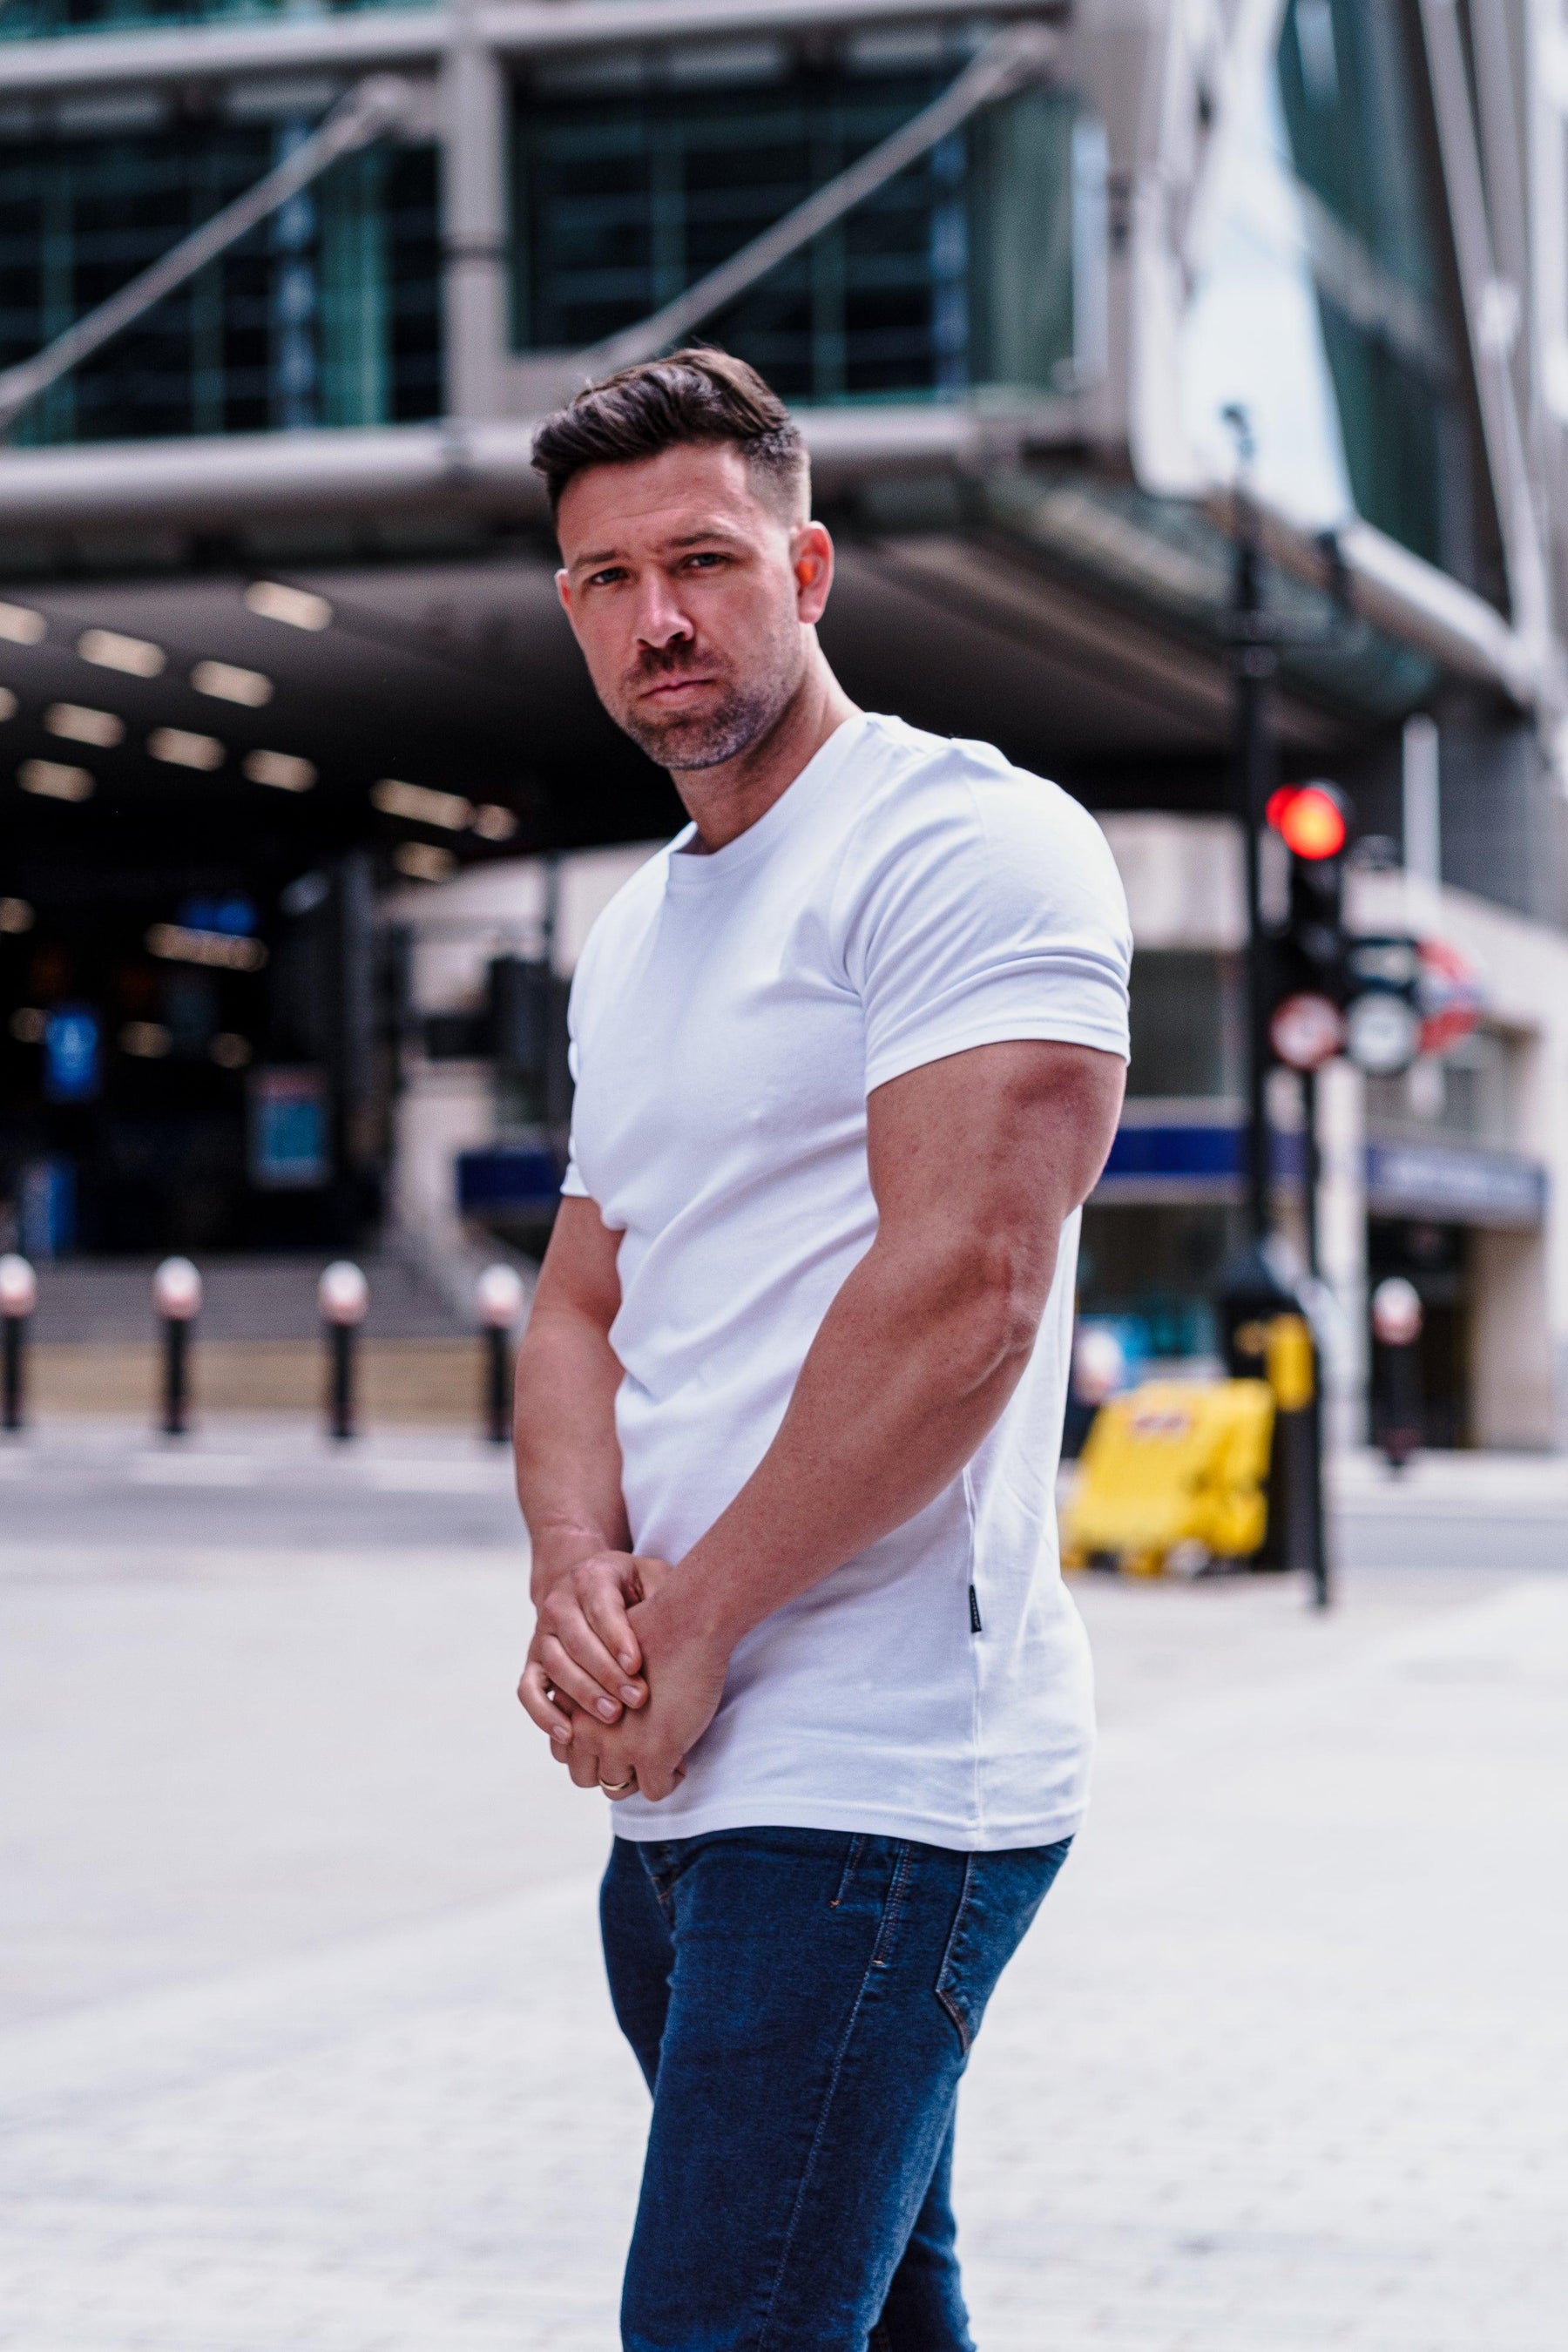 White Tapered Fit T-Shirt - Muscle Fitted T-Shirt | Tapered Menswear